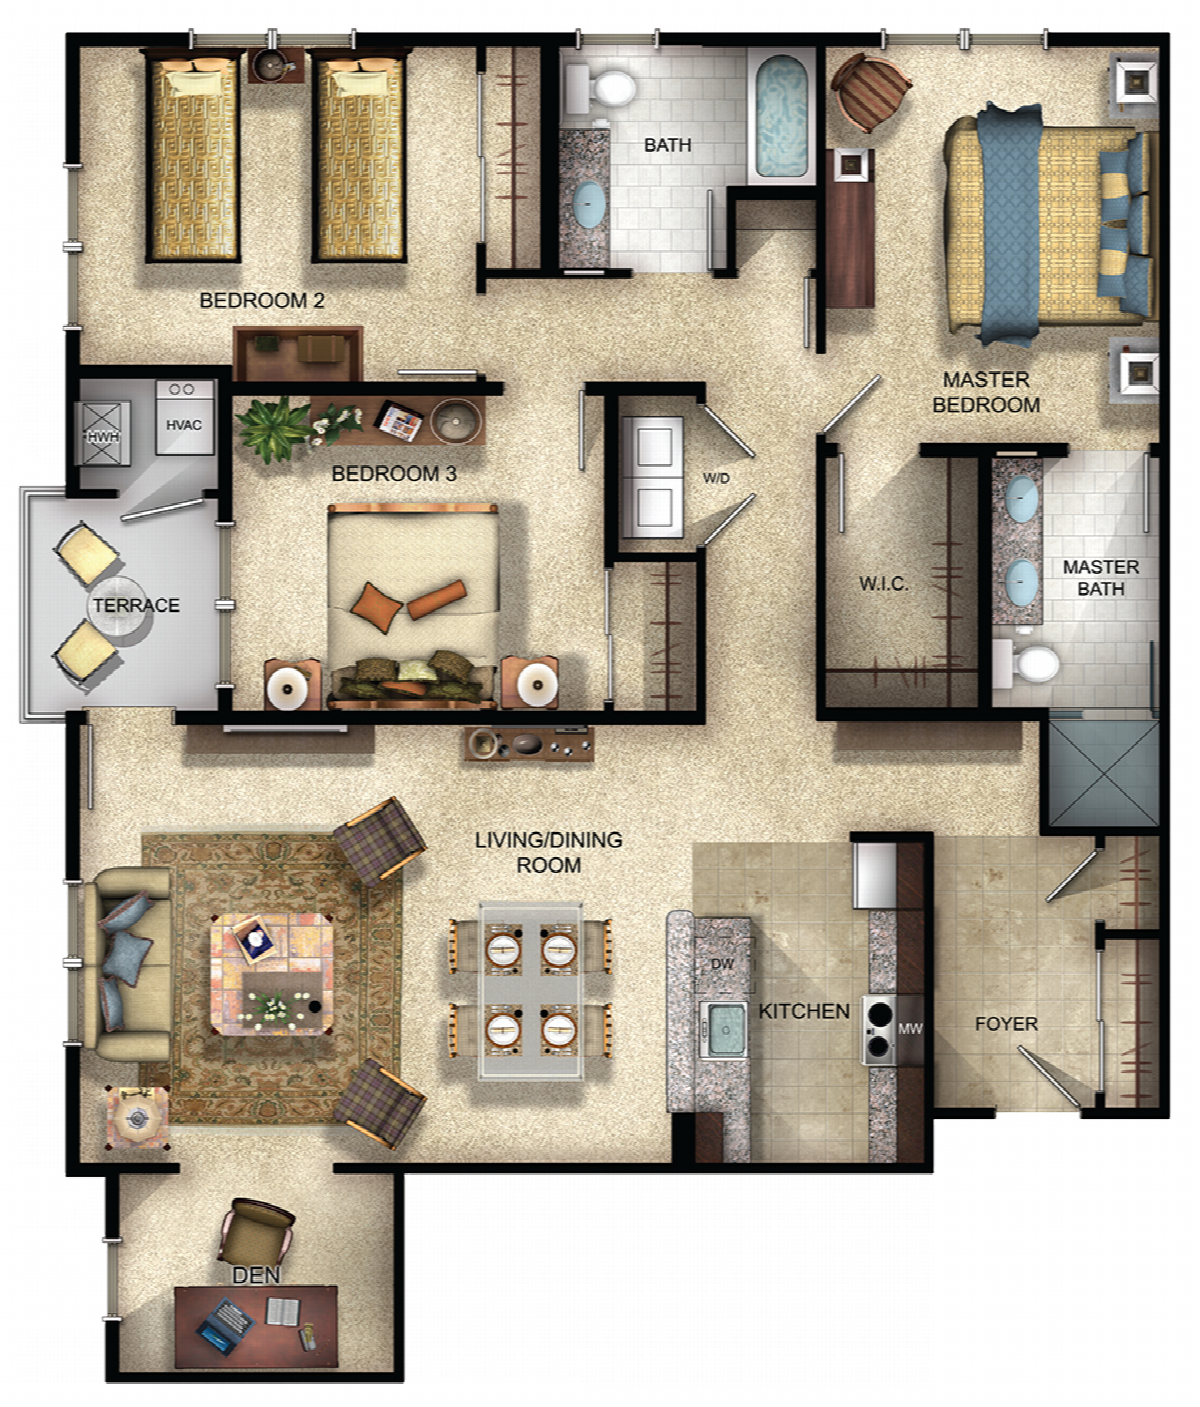 Floorplan of a luxury 3 bedroom apartment with terrace